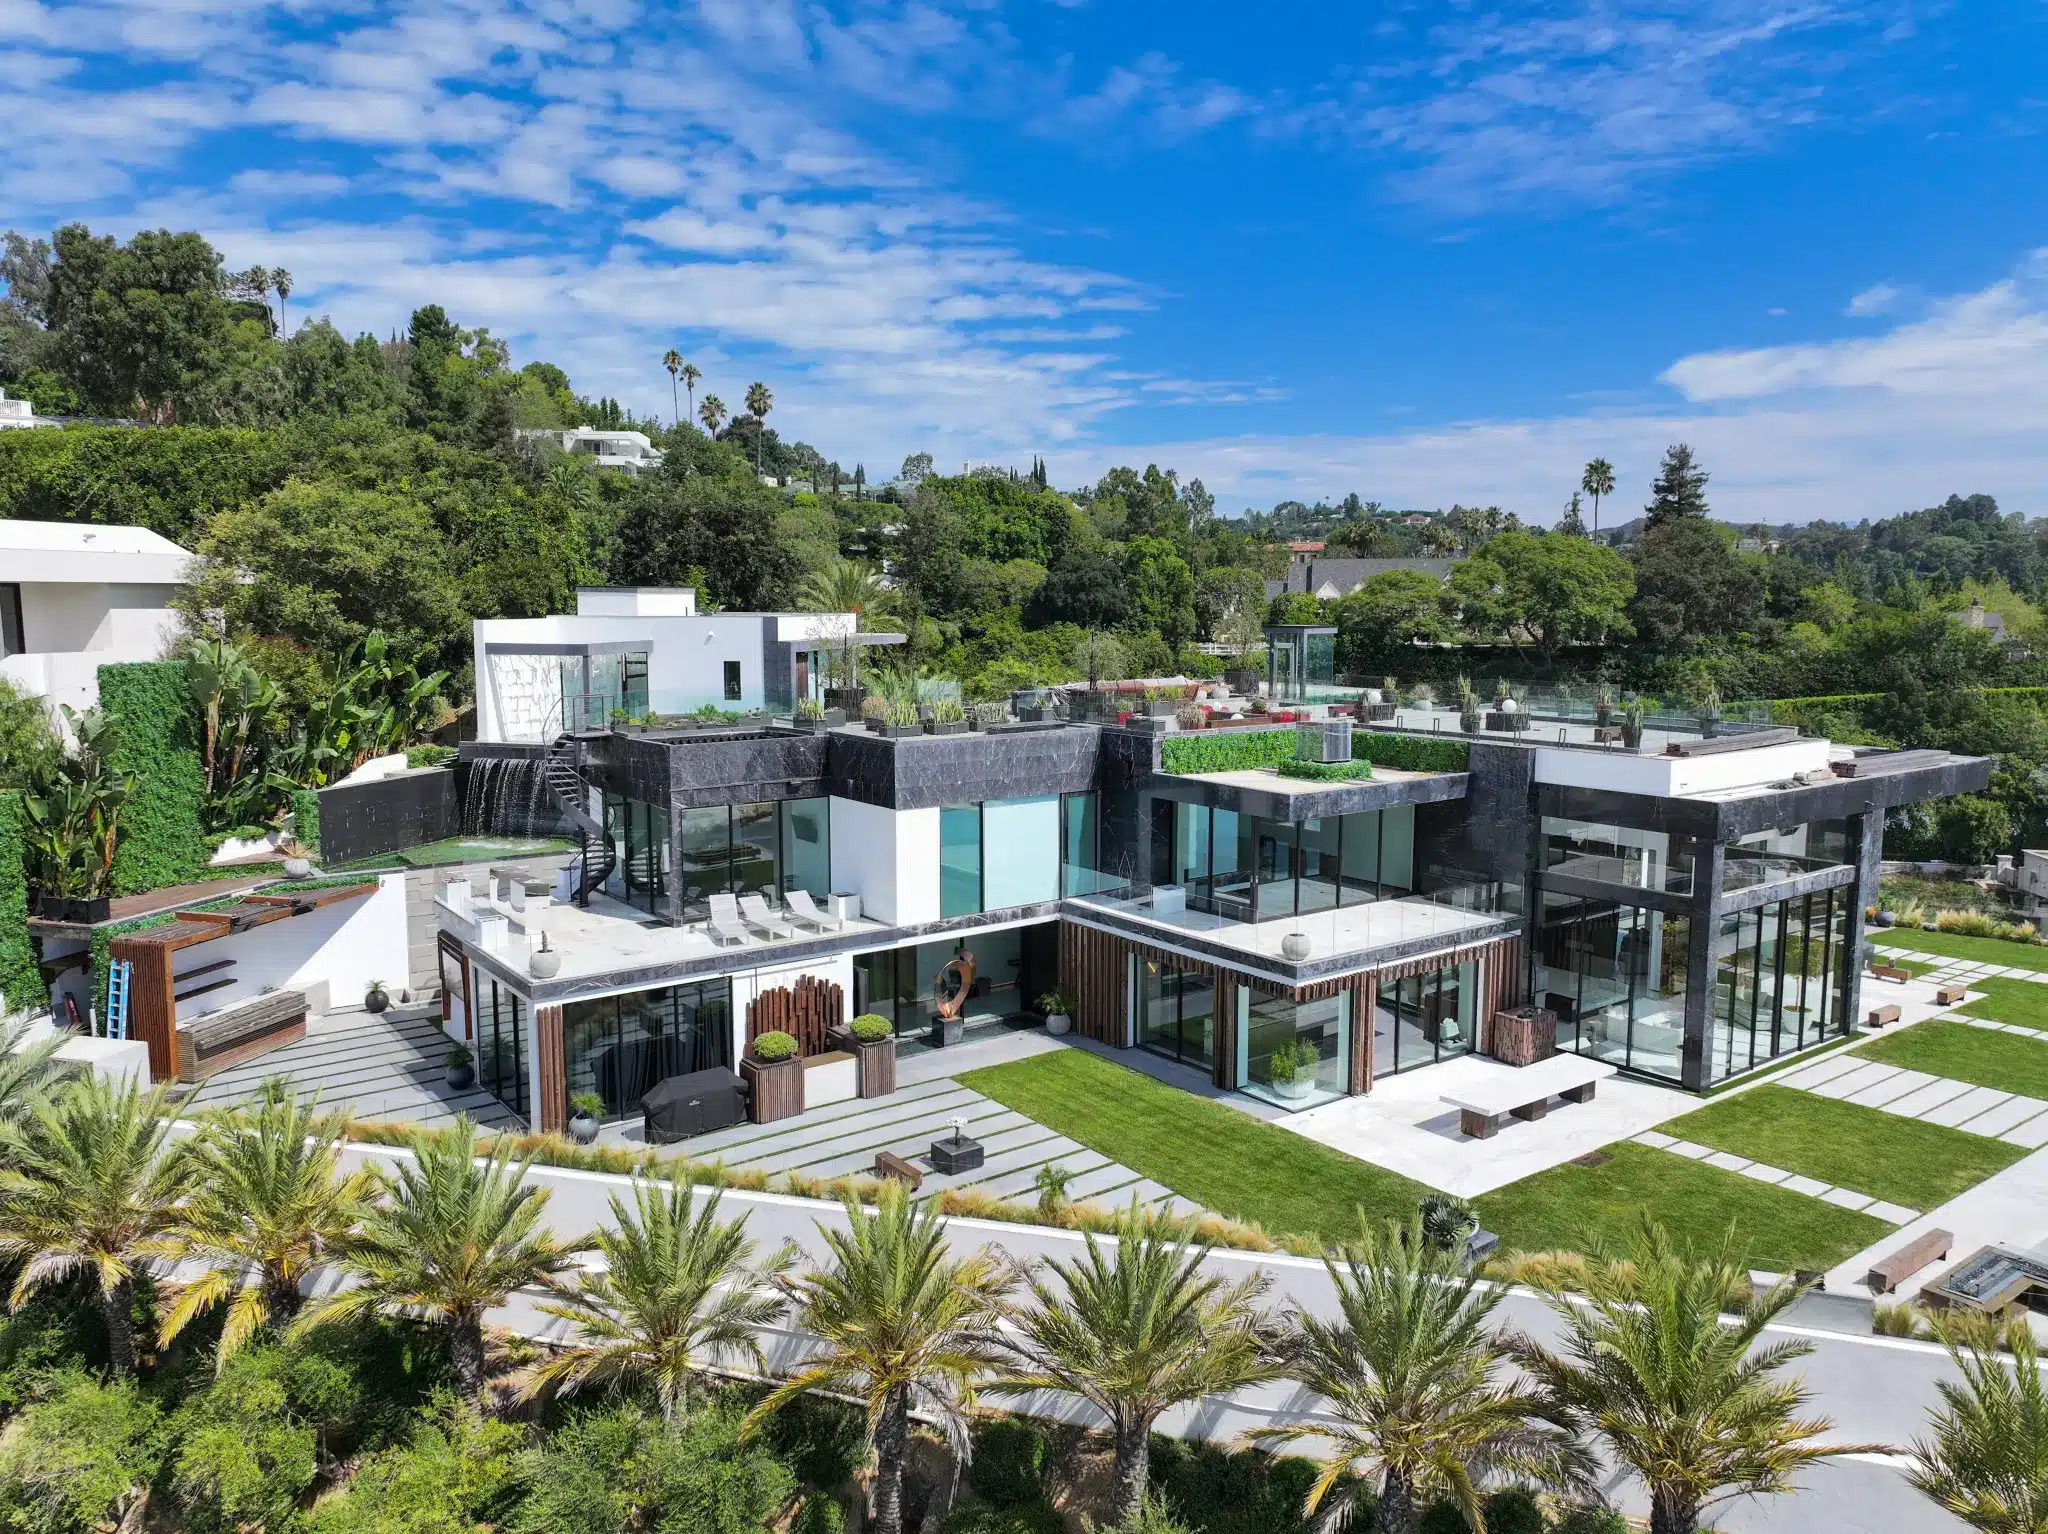 IShowSpeed buys new $10 million mansion aged just 18